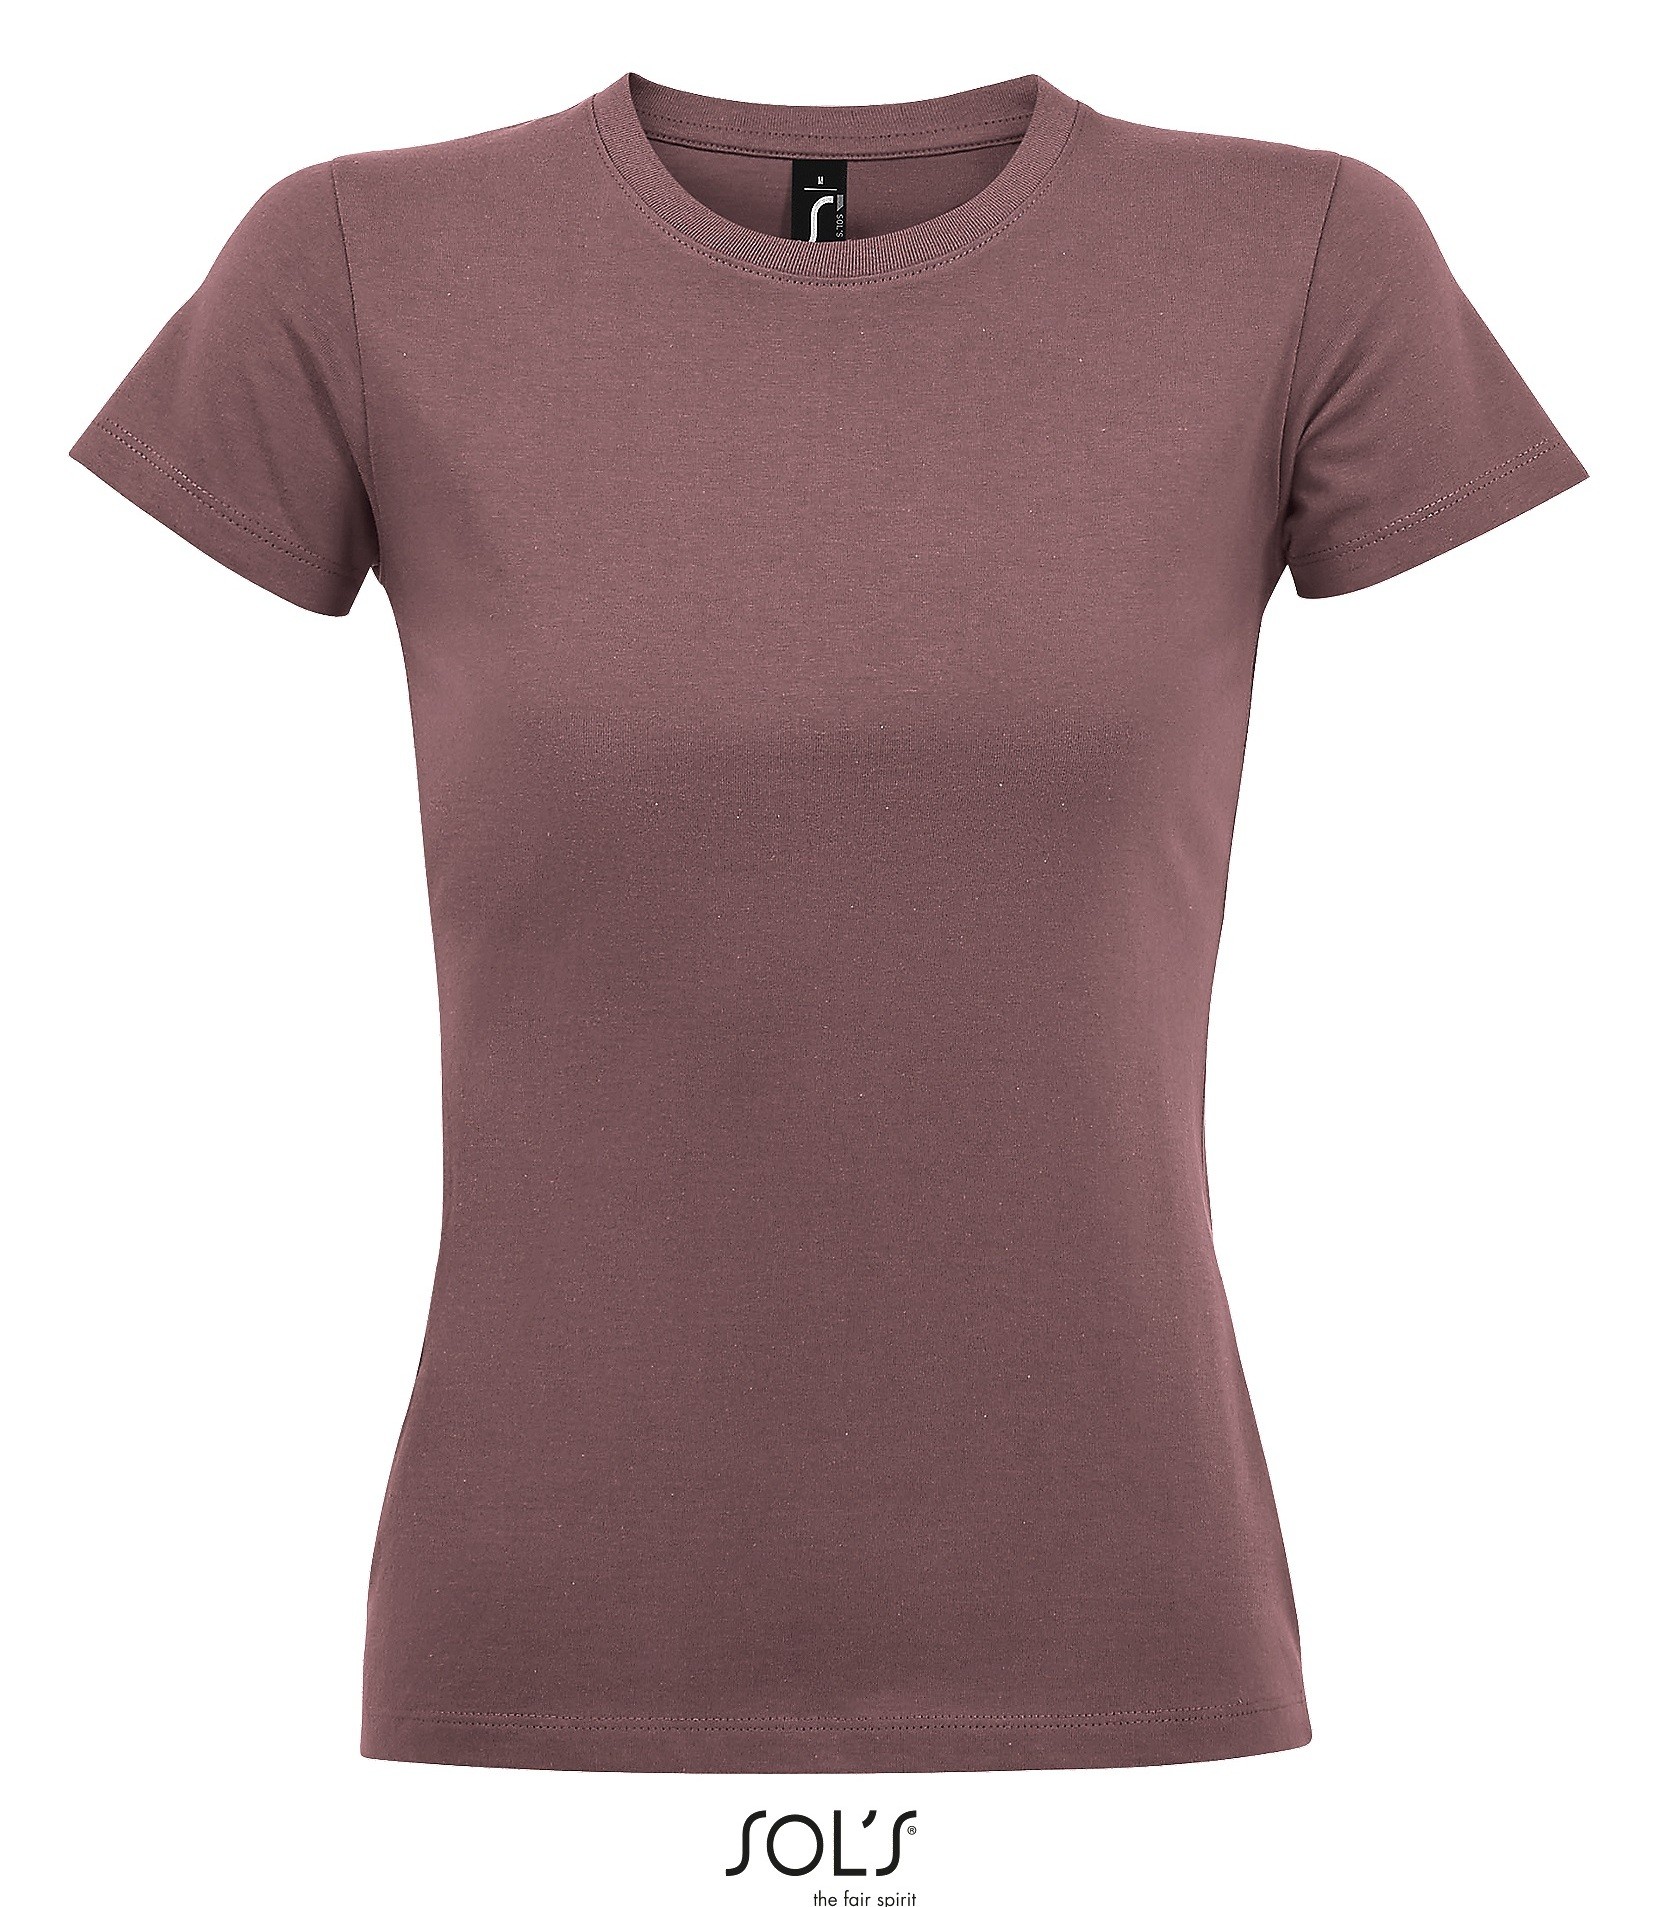 SOL'S IMPERIAL WOMEN - ROUND COLLAR T-SHIRT ANCIENT PINK